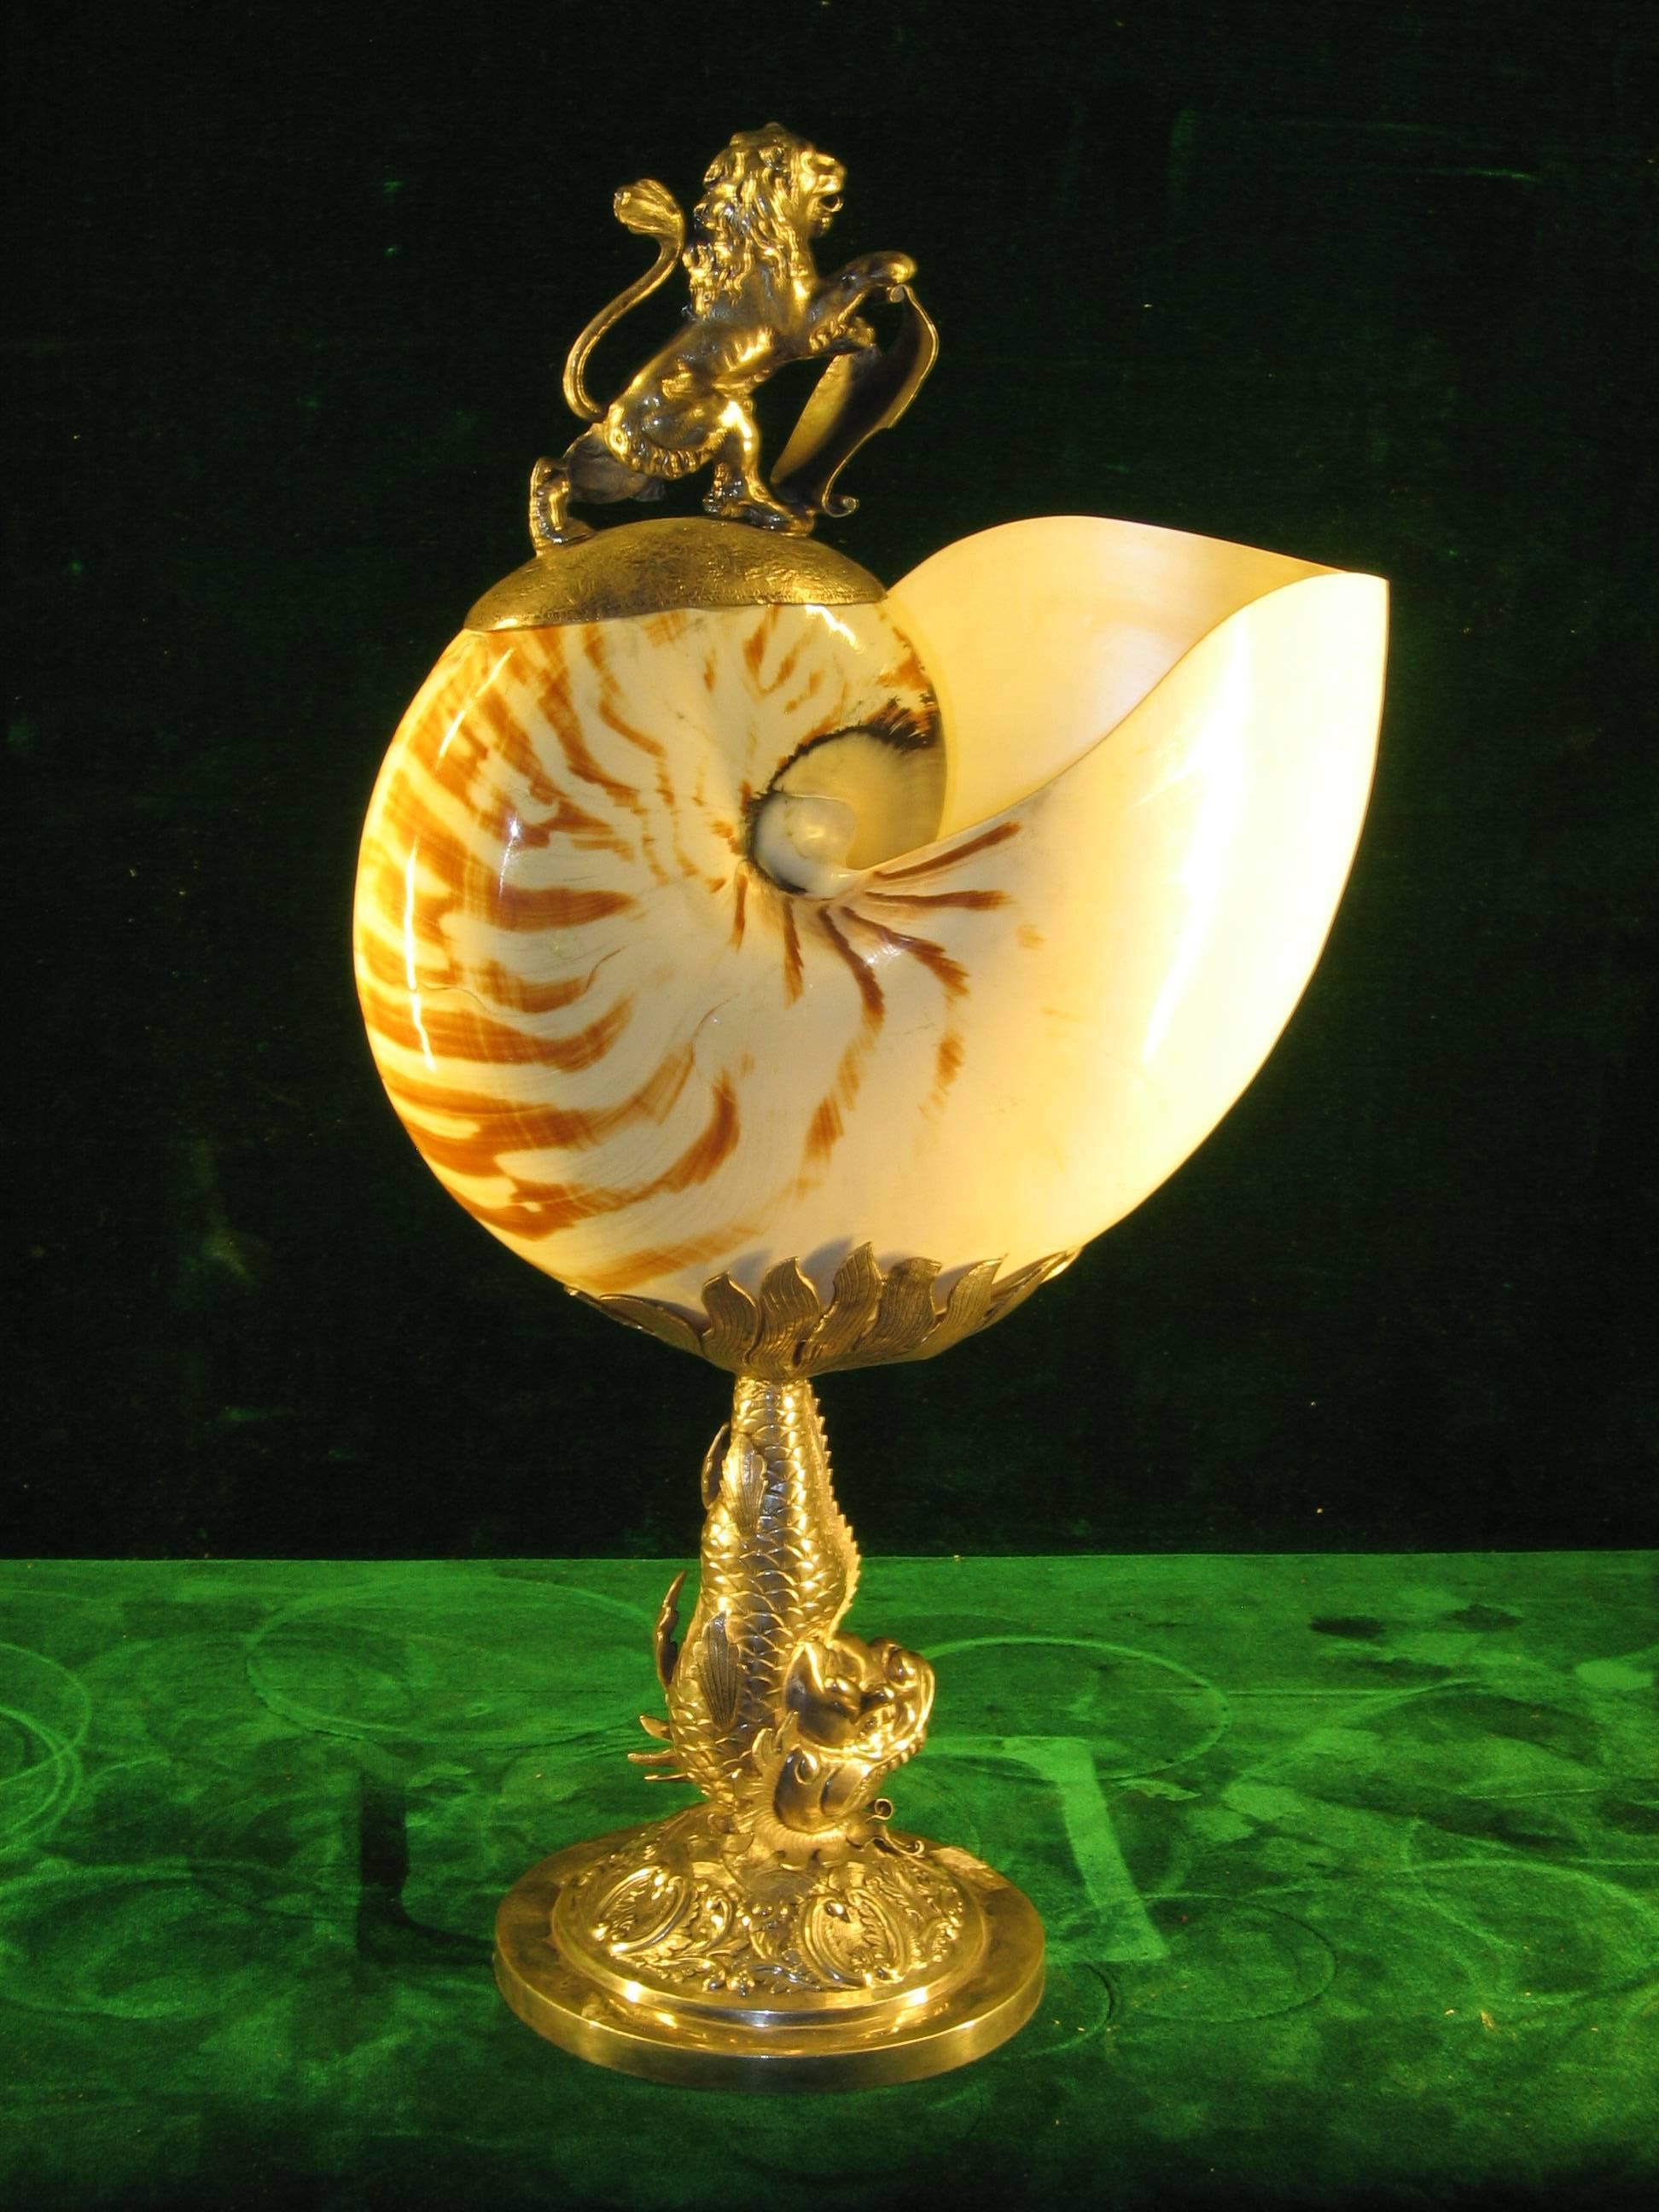 Nautilus mounted in silver of the 19th century (Shell Nautilus)
The support consists of a sea monster resting on a round base, the nautilus being surmounted by a lion resting on a leather engraved with coats of arms of the Polish family